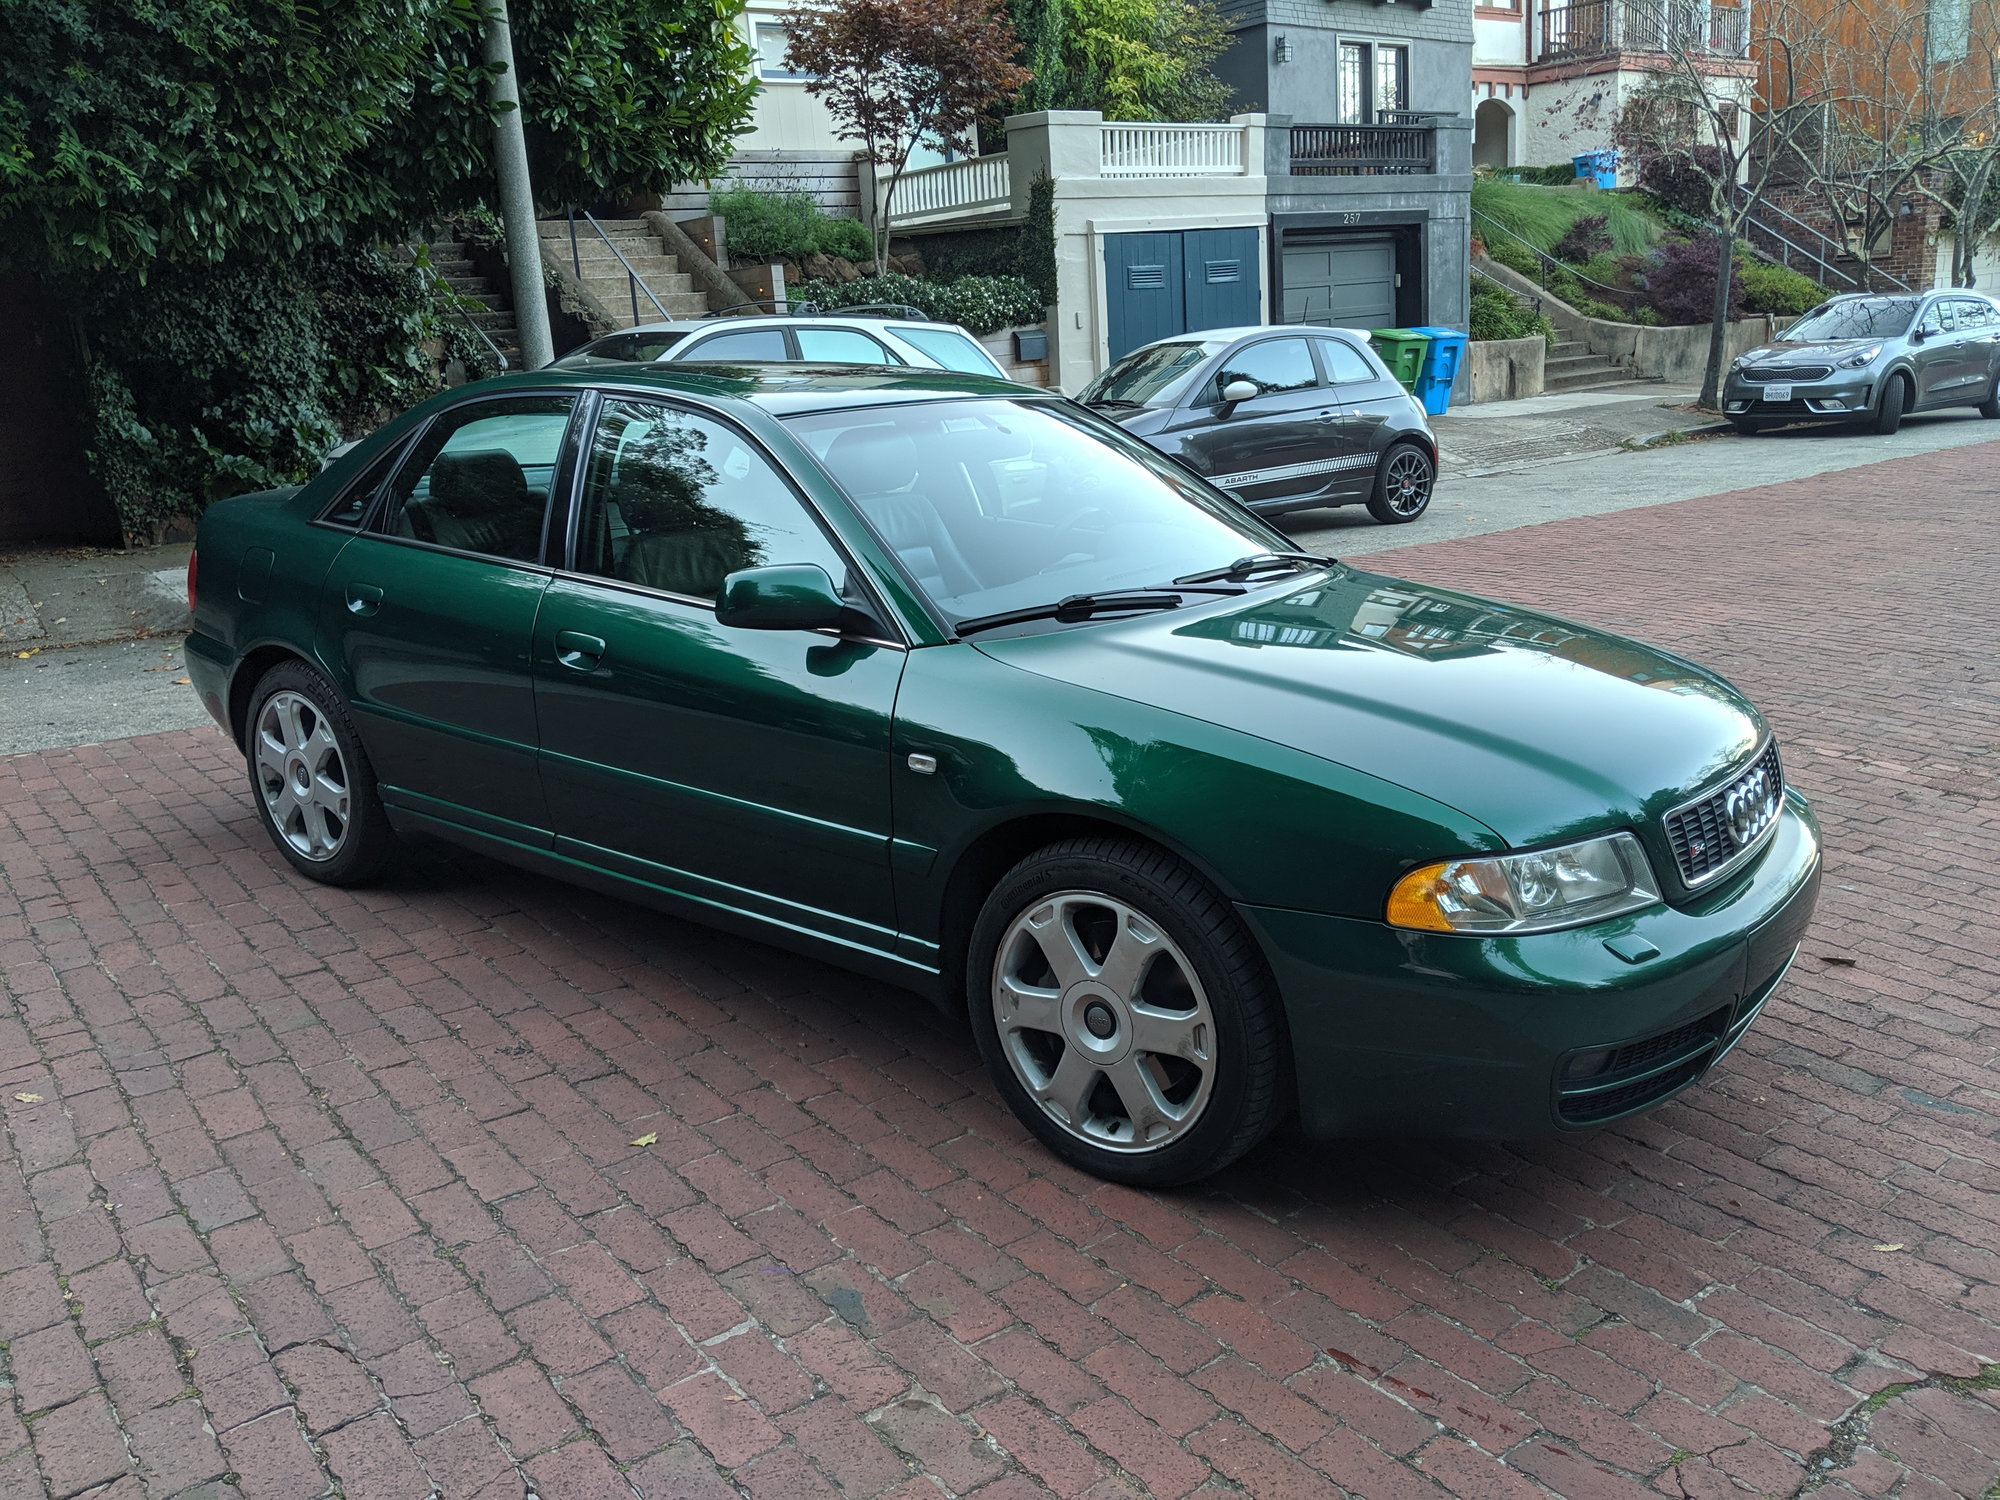 Audi Other FS in San Francisco: 2001.5 Audi B5 S4 in Cactus Green -  AudiWorld Forums